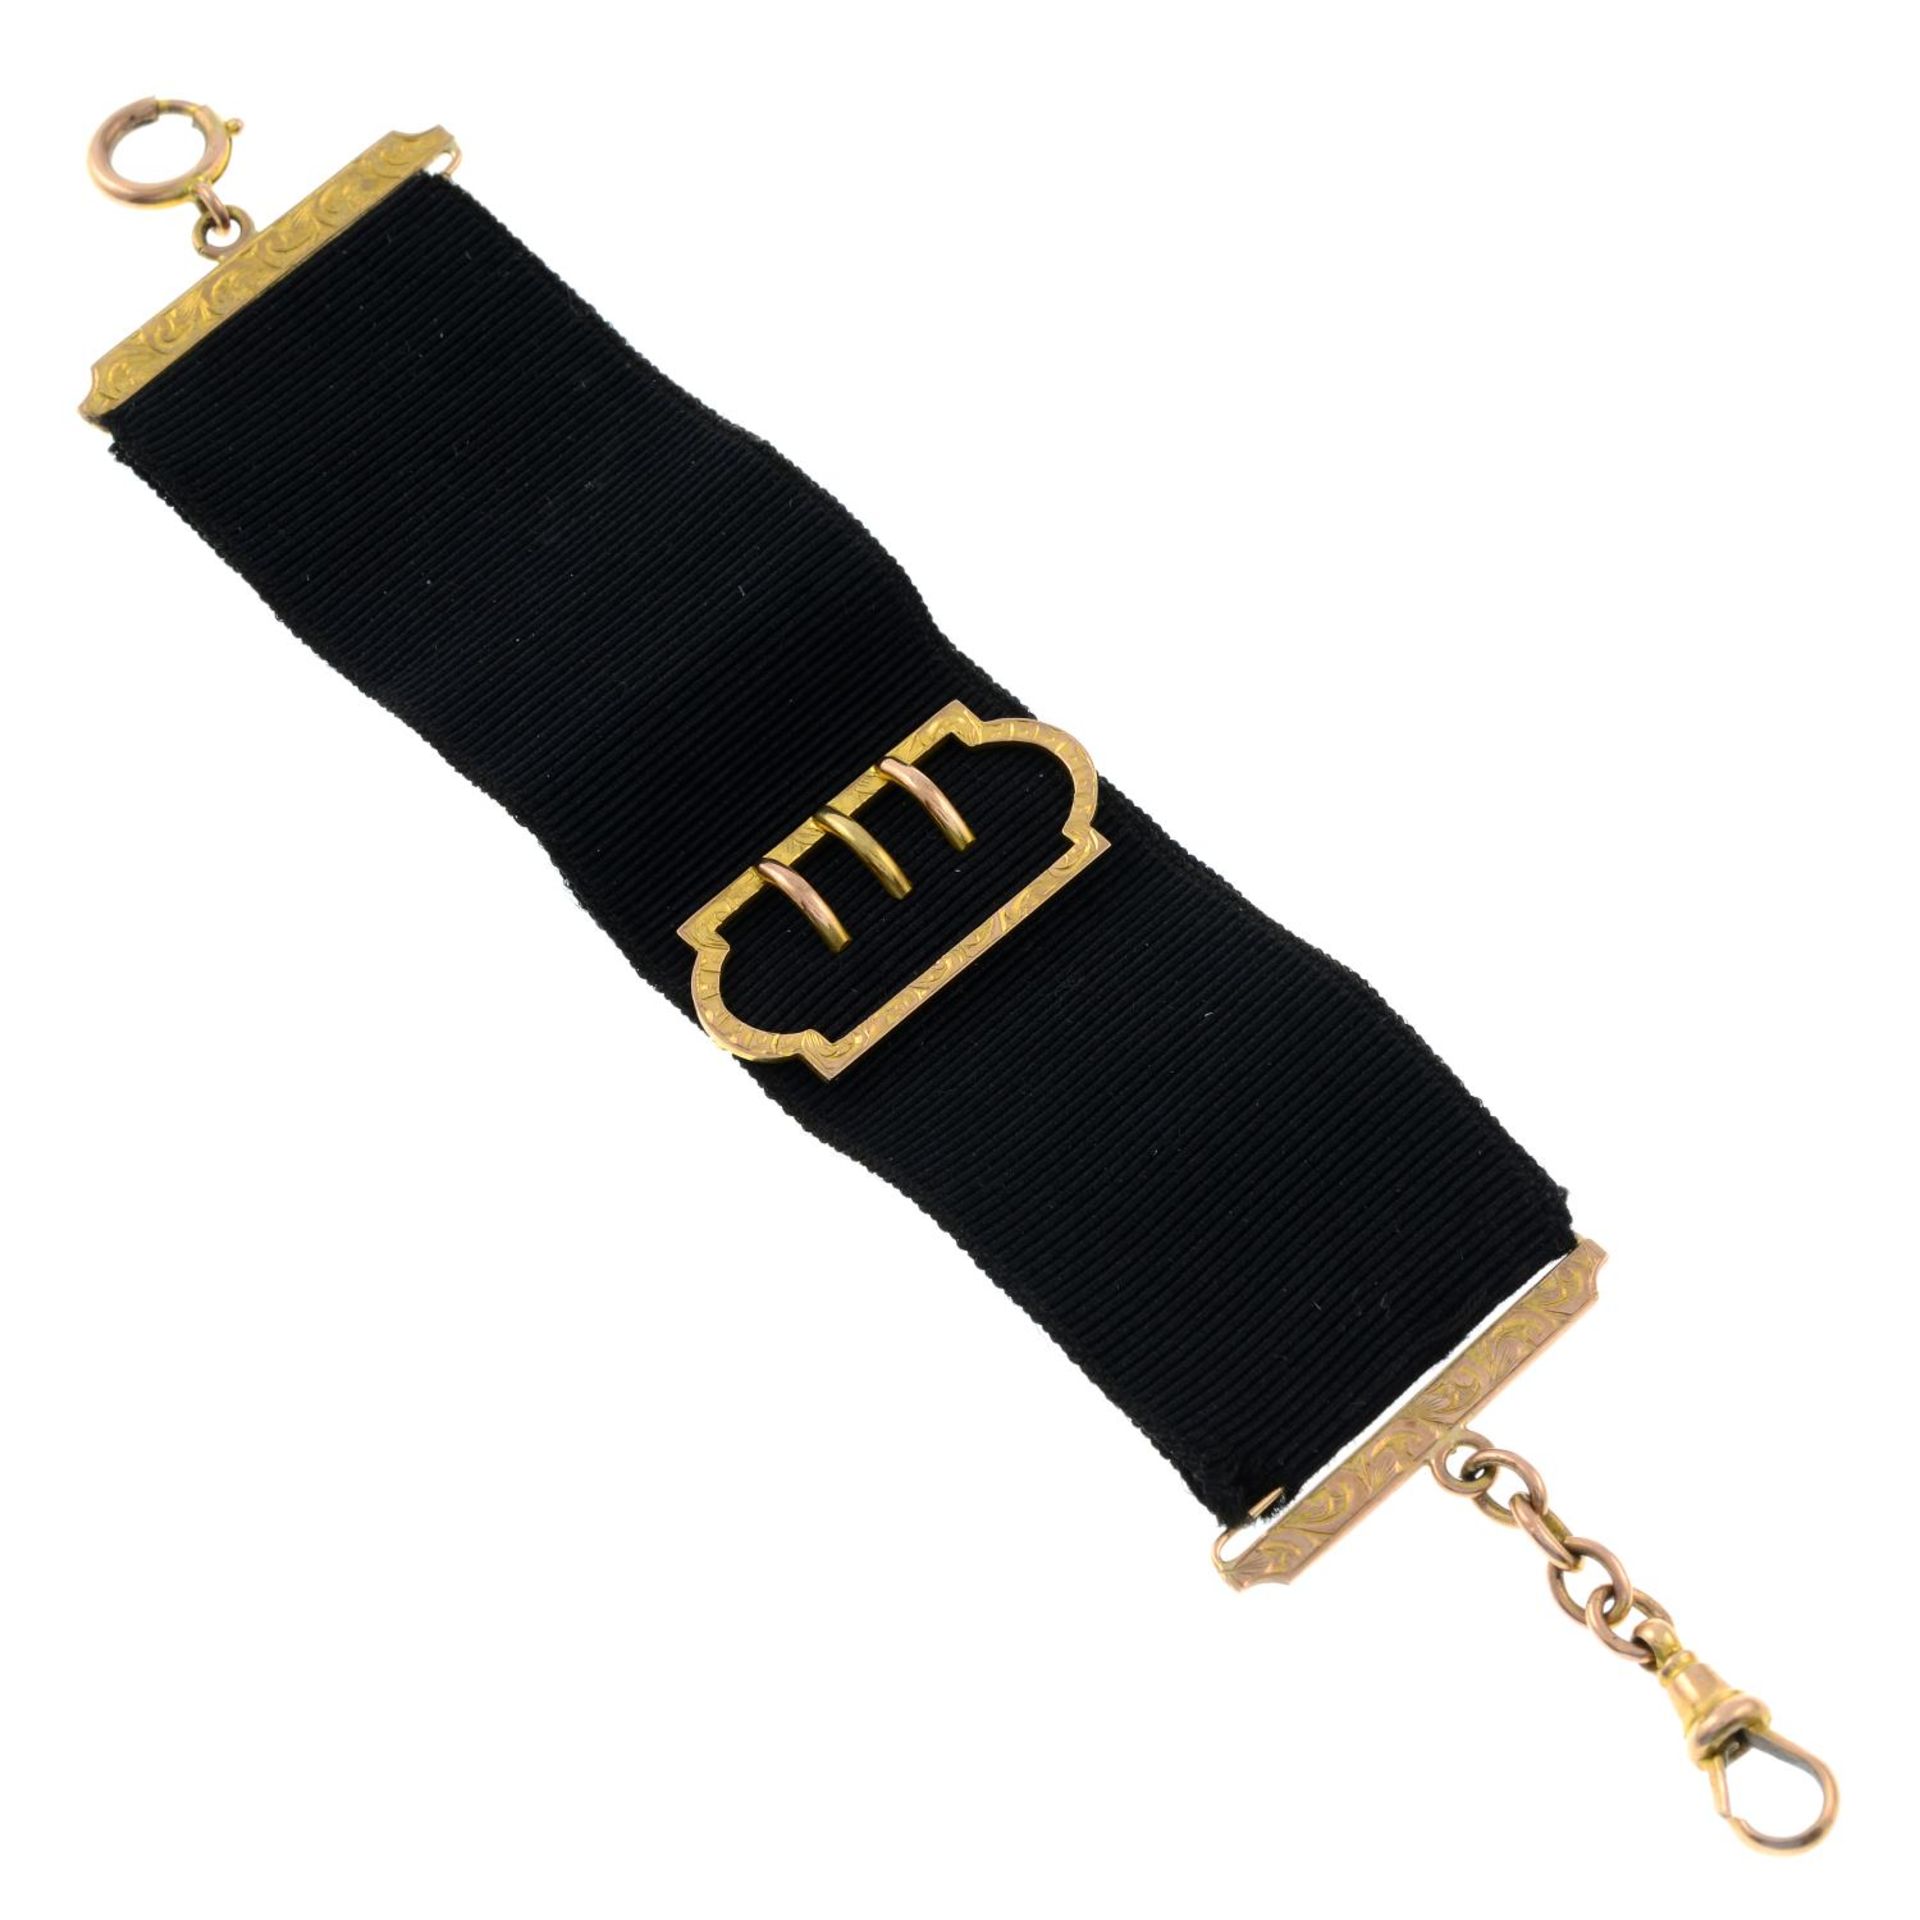 A late 19th century 9ct gold watch fob belt, with buckle motif.Stamped 9CT.